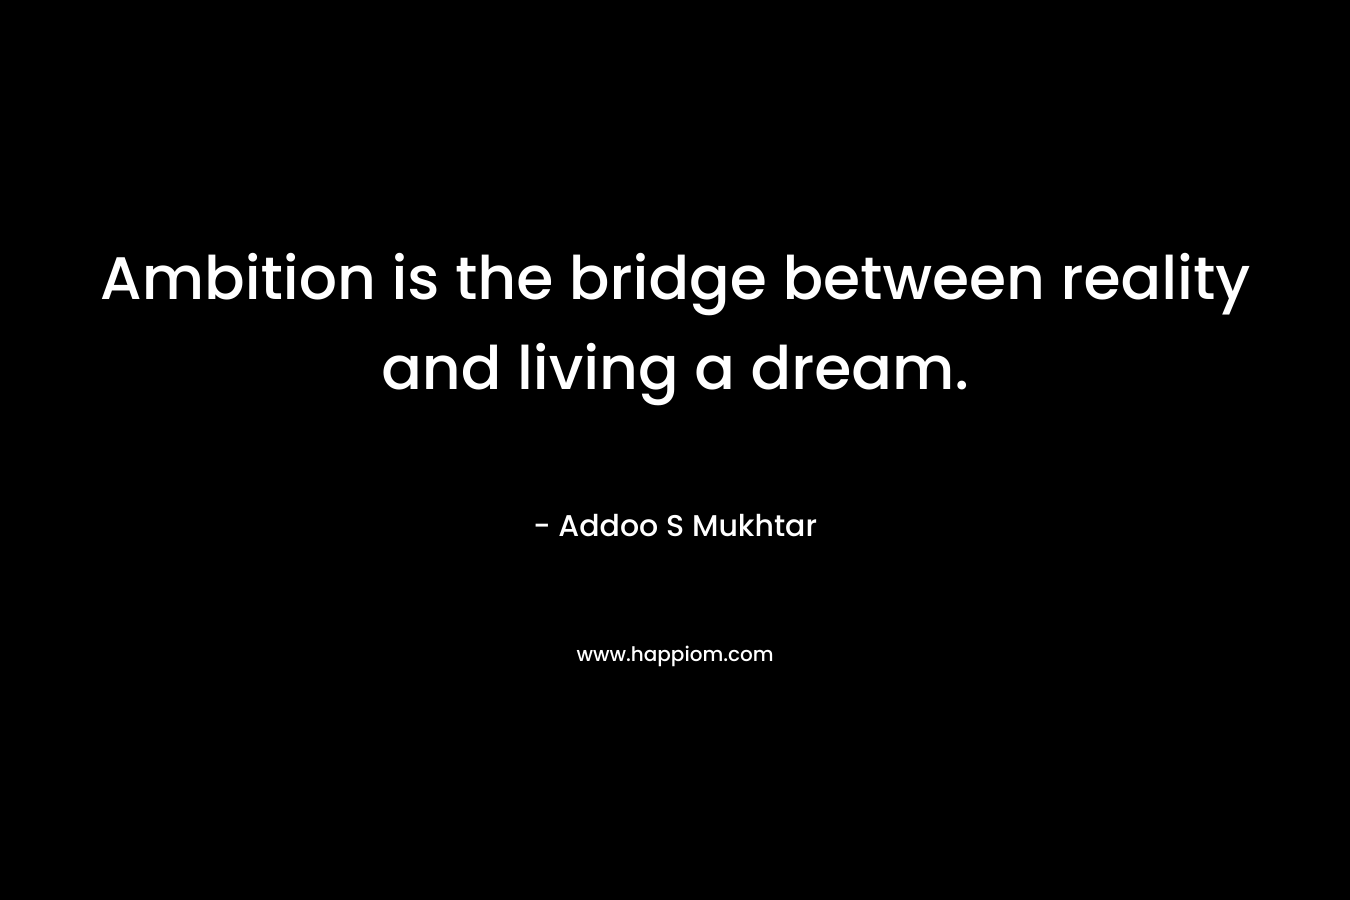 Ambition is the bridge between reality and living a dream. – Addoo S Mukhtar